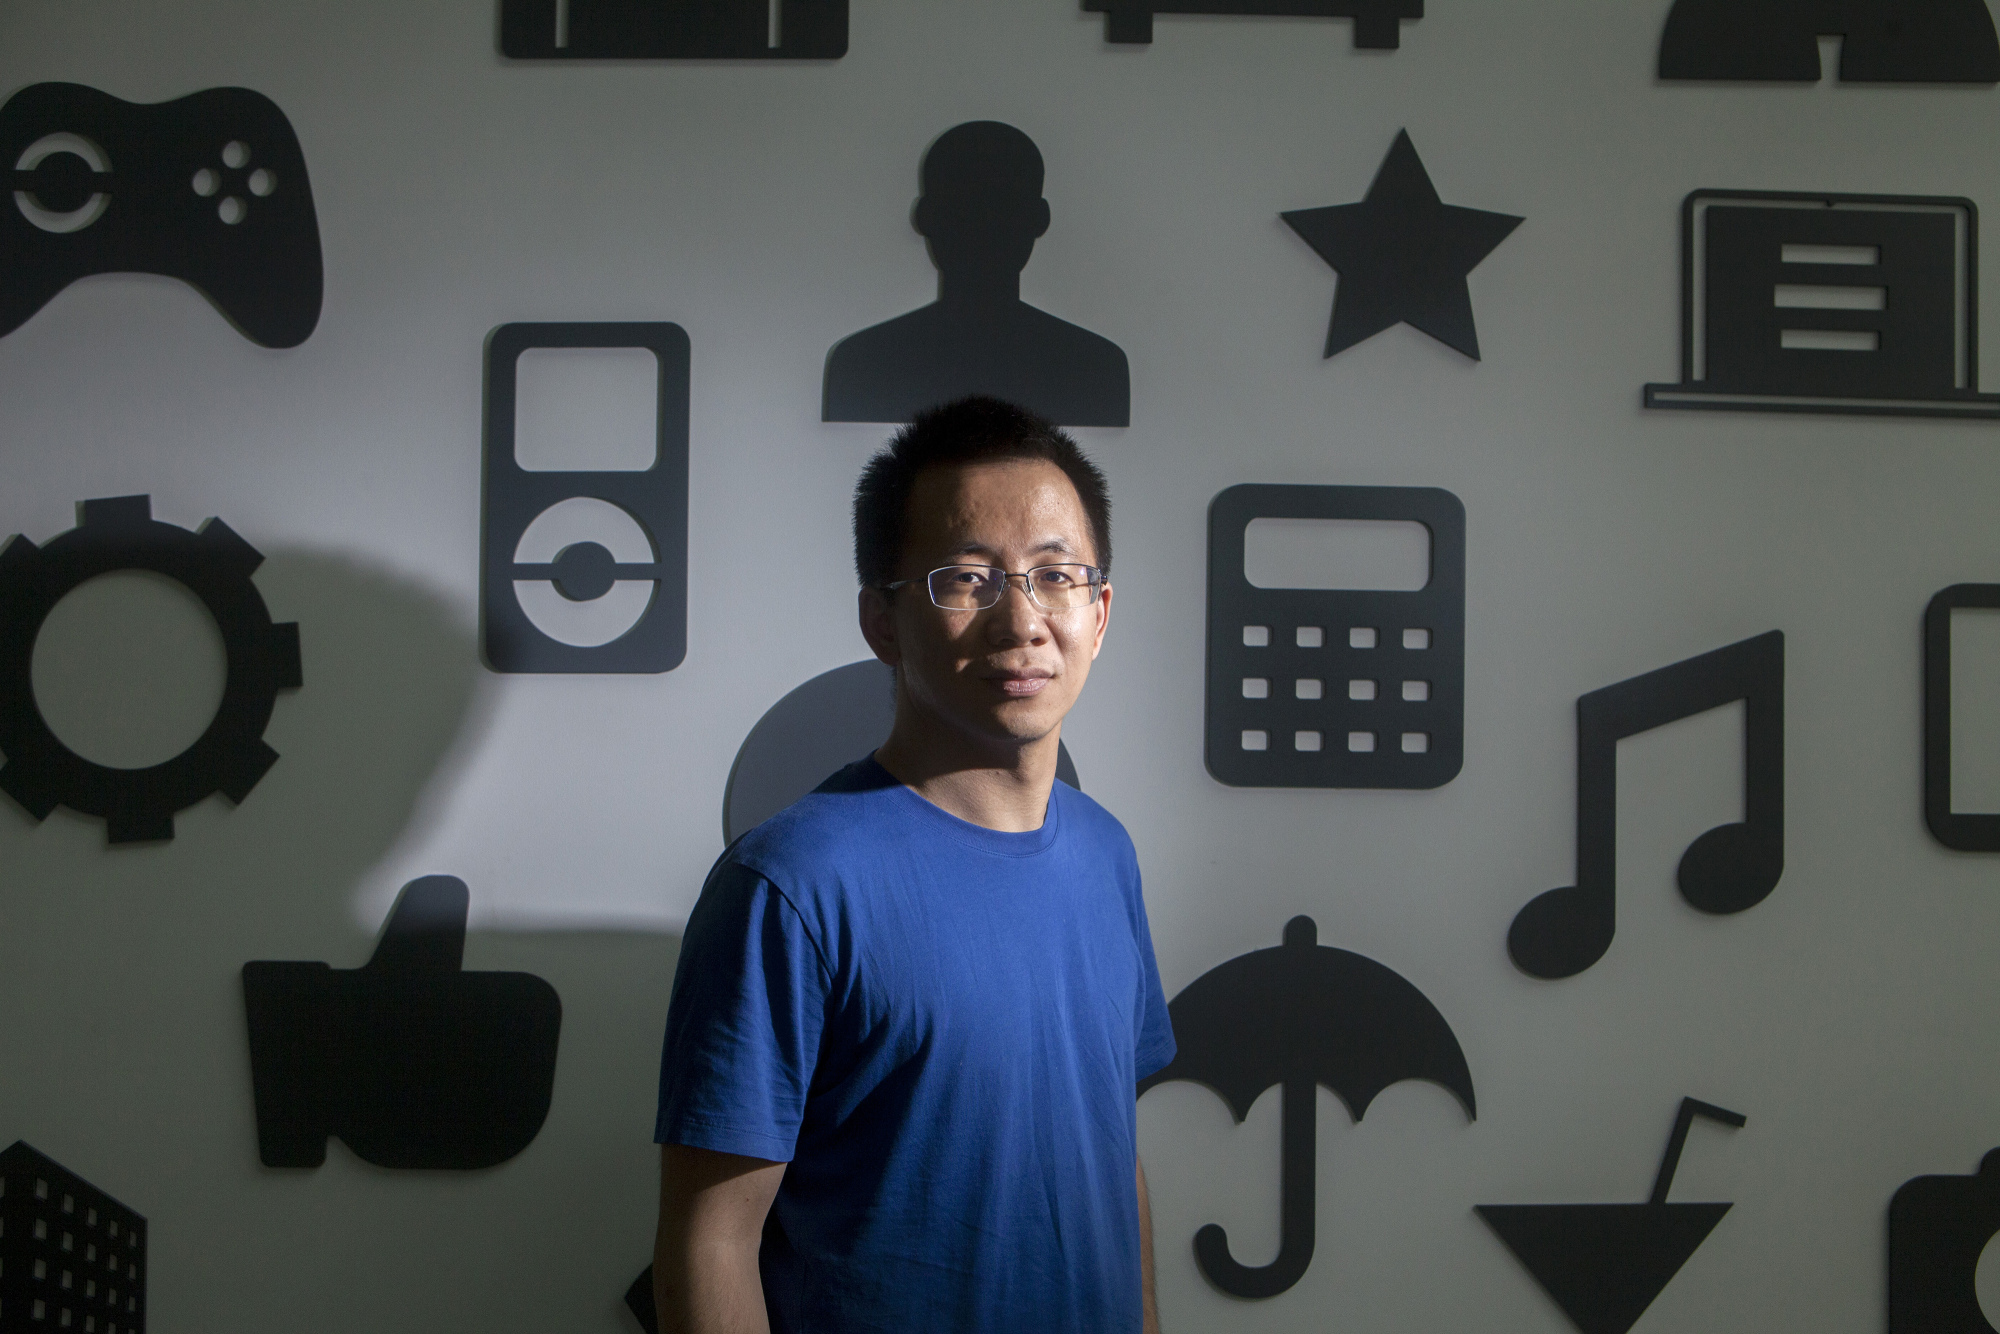 Zhang Yiming, founder of ByteDance, at the company's headquarters in Beijing.